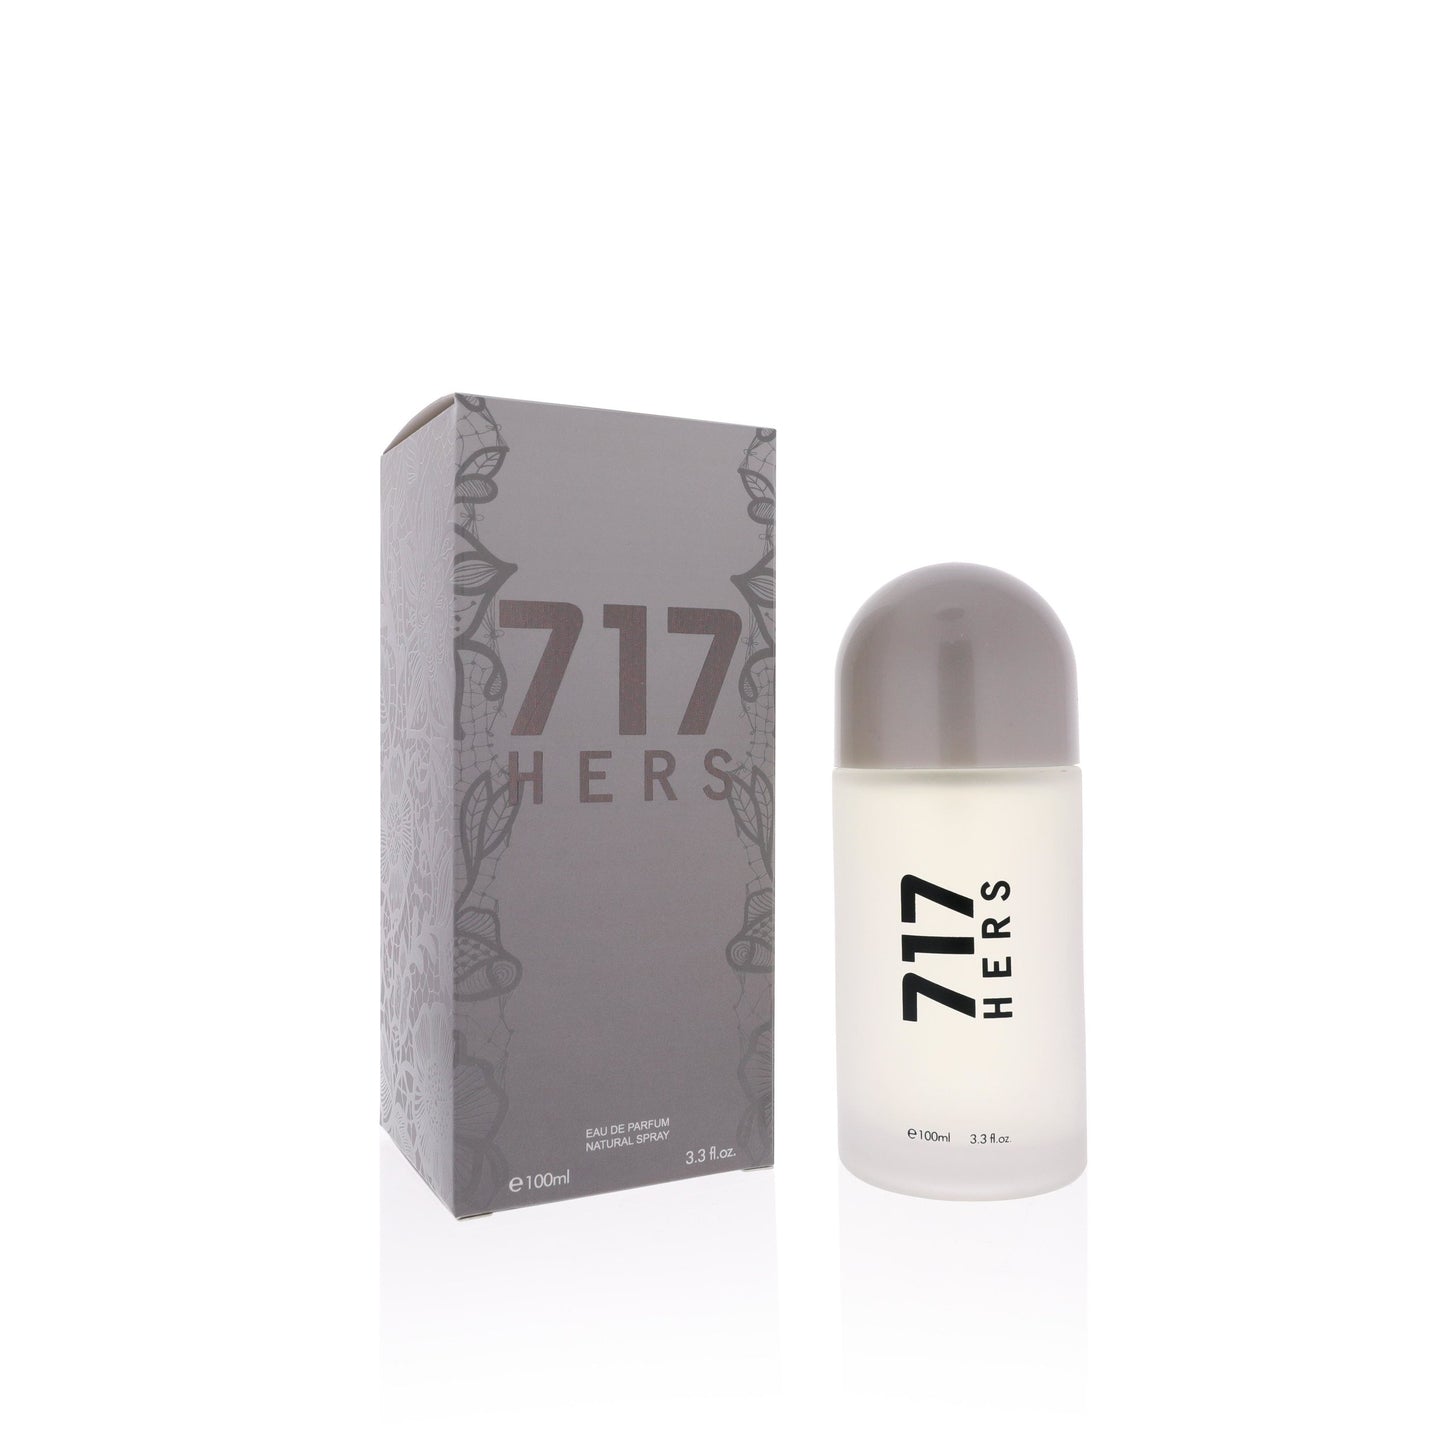 717 Hers Women's Perfume: Elegance Redefined - Discover a Timeless Scent Crafted Exclusively for Her